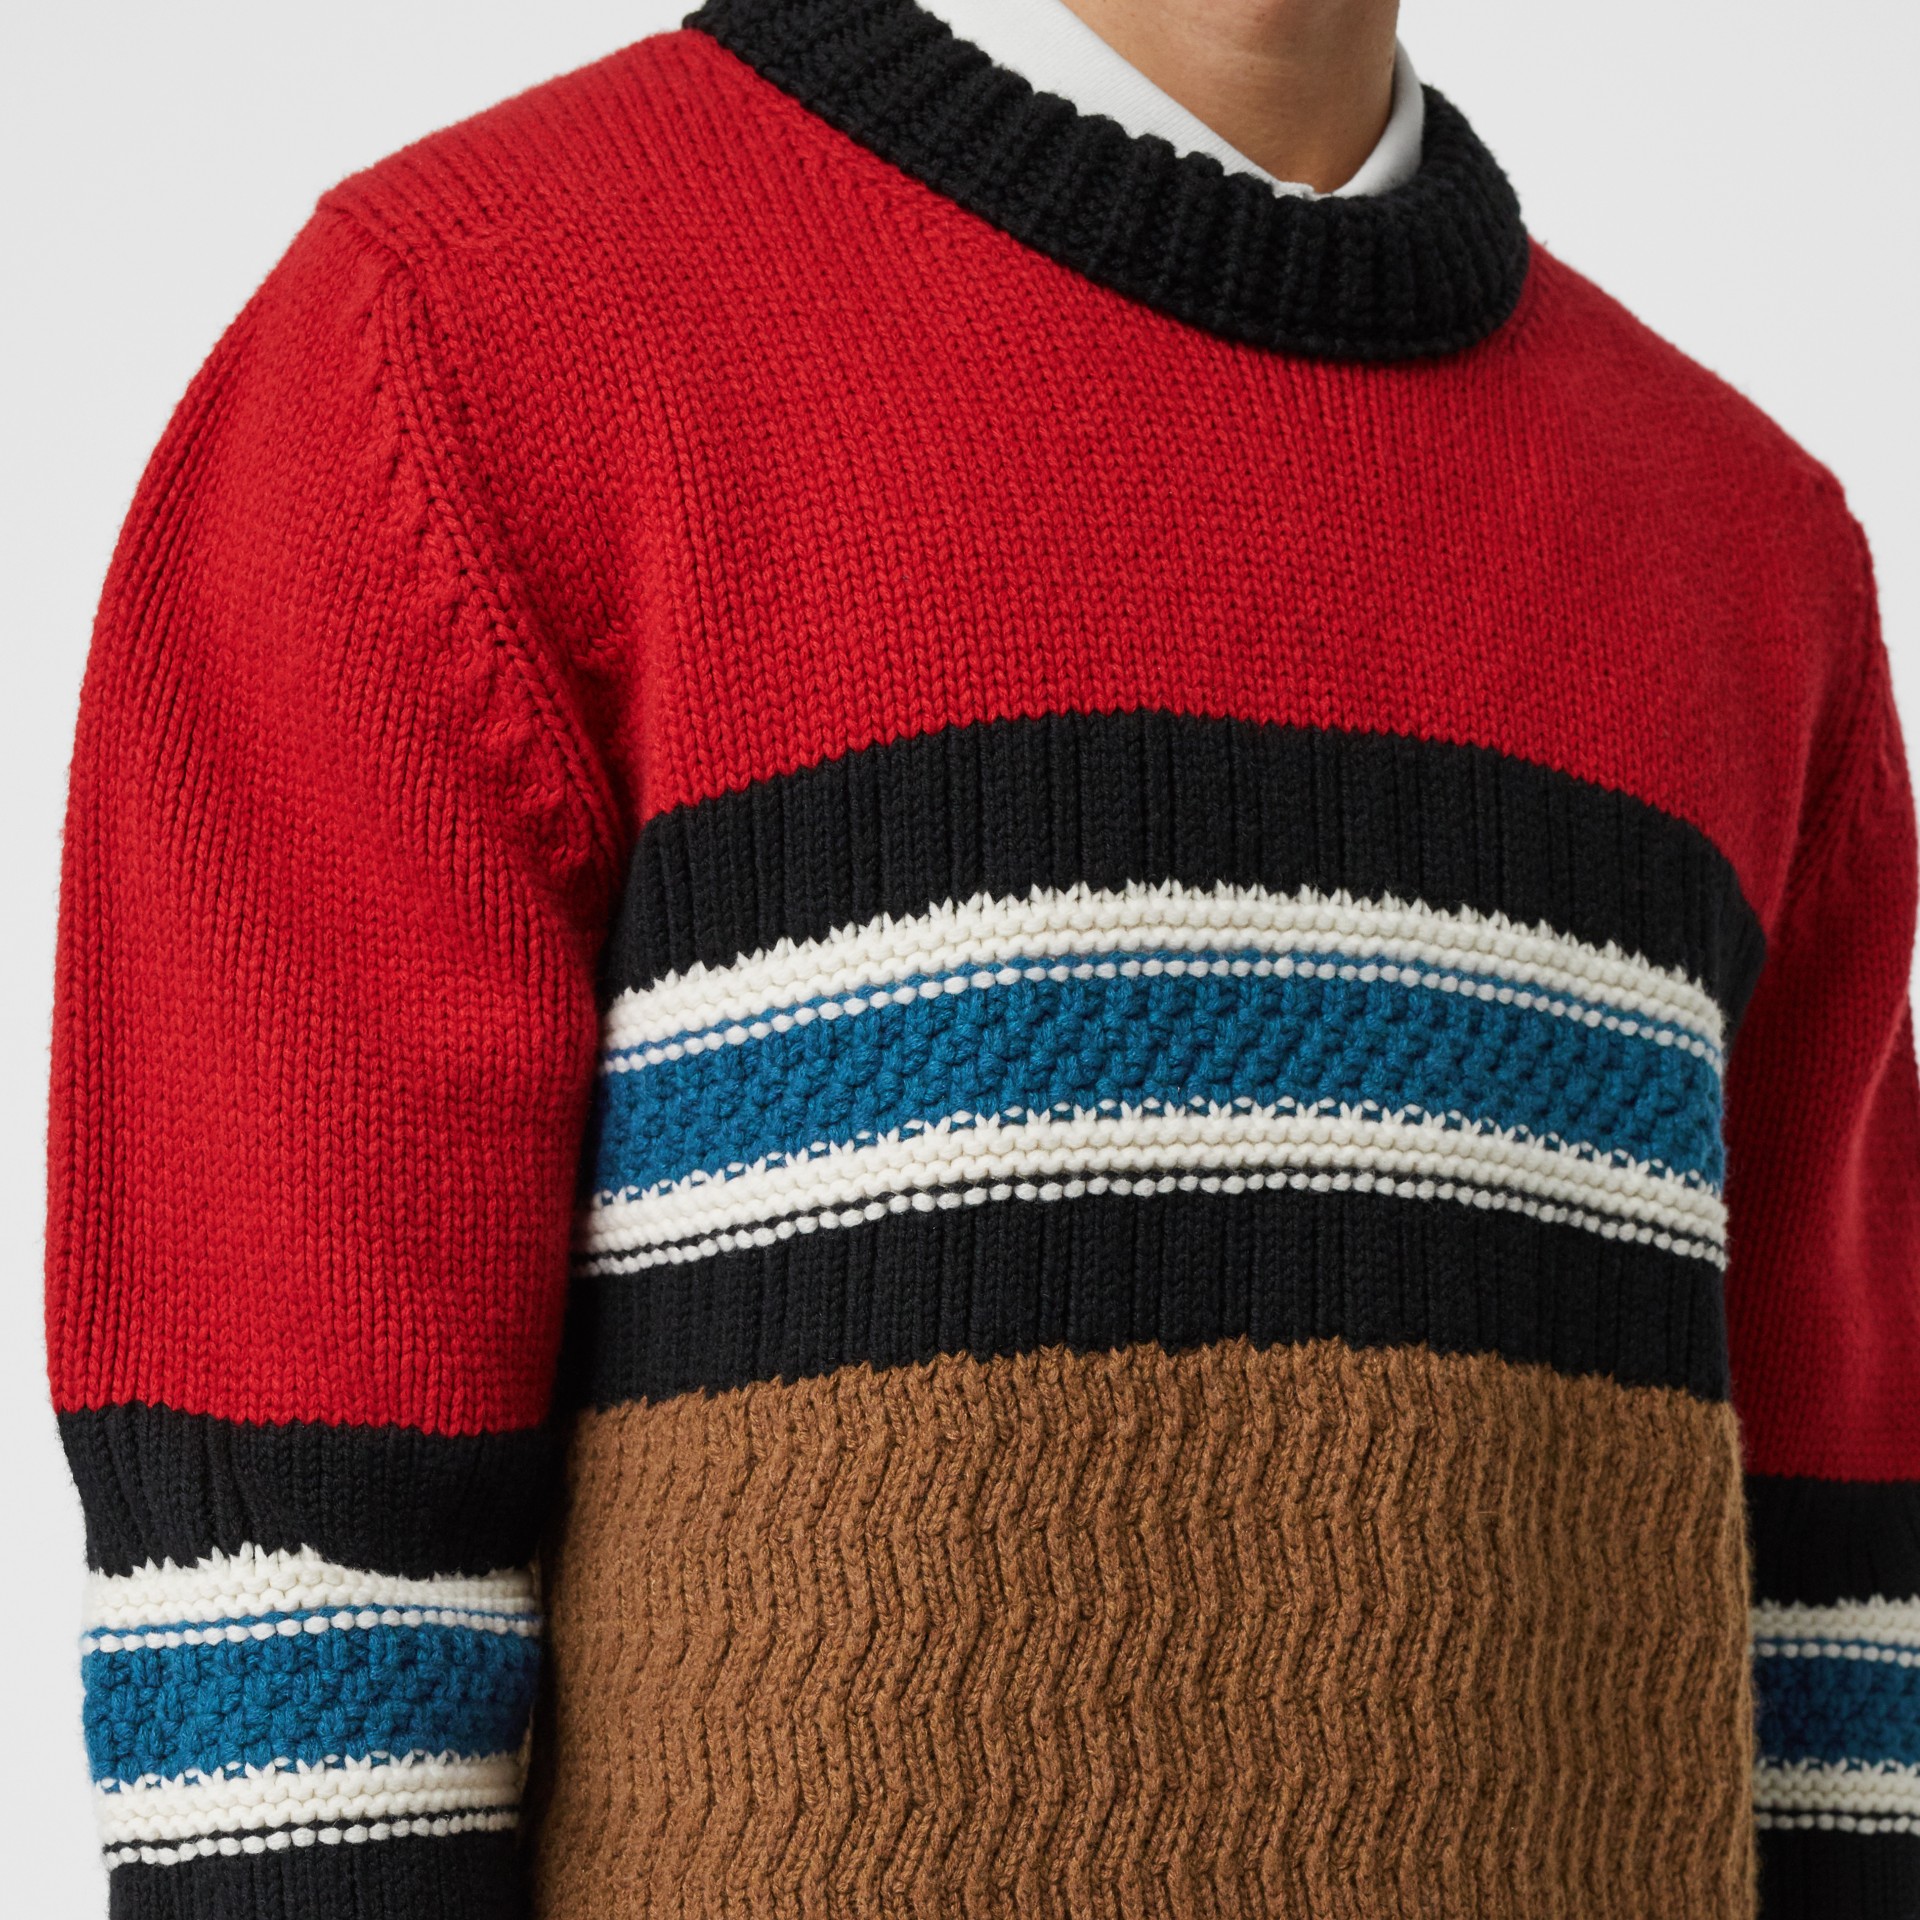 Striped Wool Cashmere Sweater in Bright Red - Men | Burberry United States